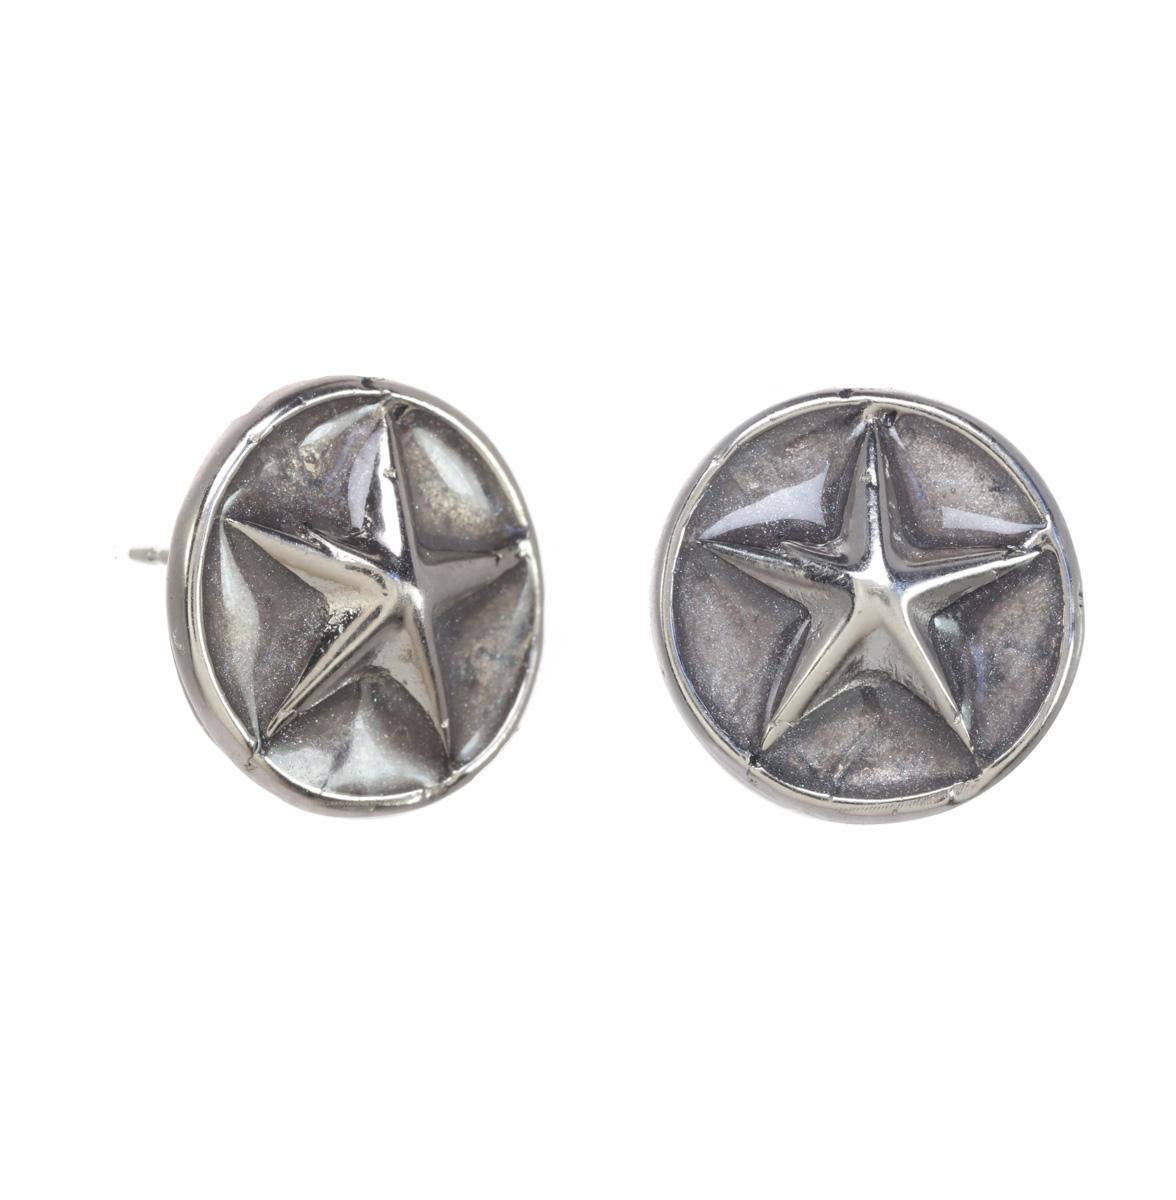 Made-to-Order. 100% Made in New York City. Please allow 10-15 business days for our artisans to make your jewelry for you!
A stunning his and her set, these gorgeous cuff link and matching earrings are the perfect gift for the one's who have it all!